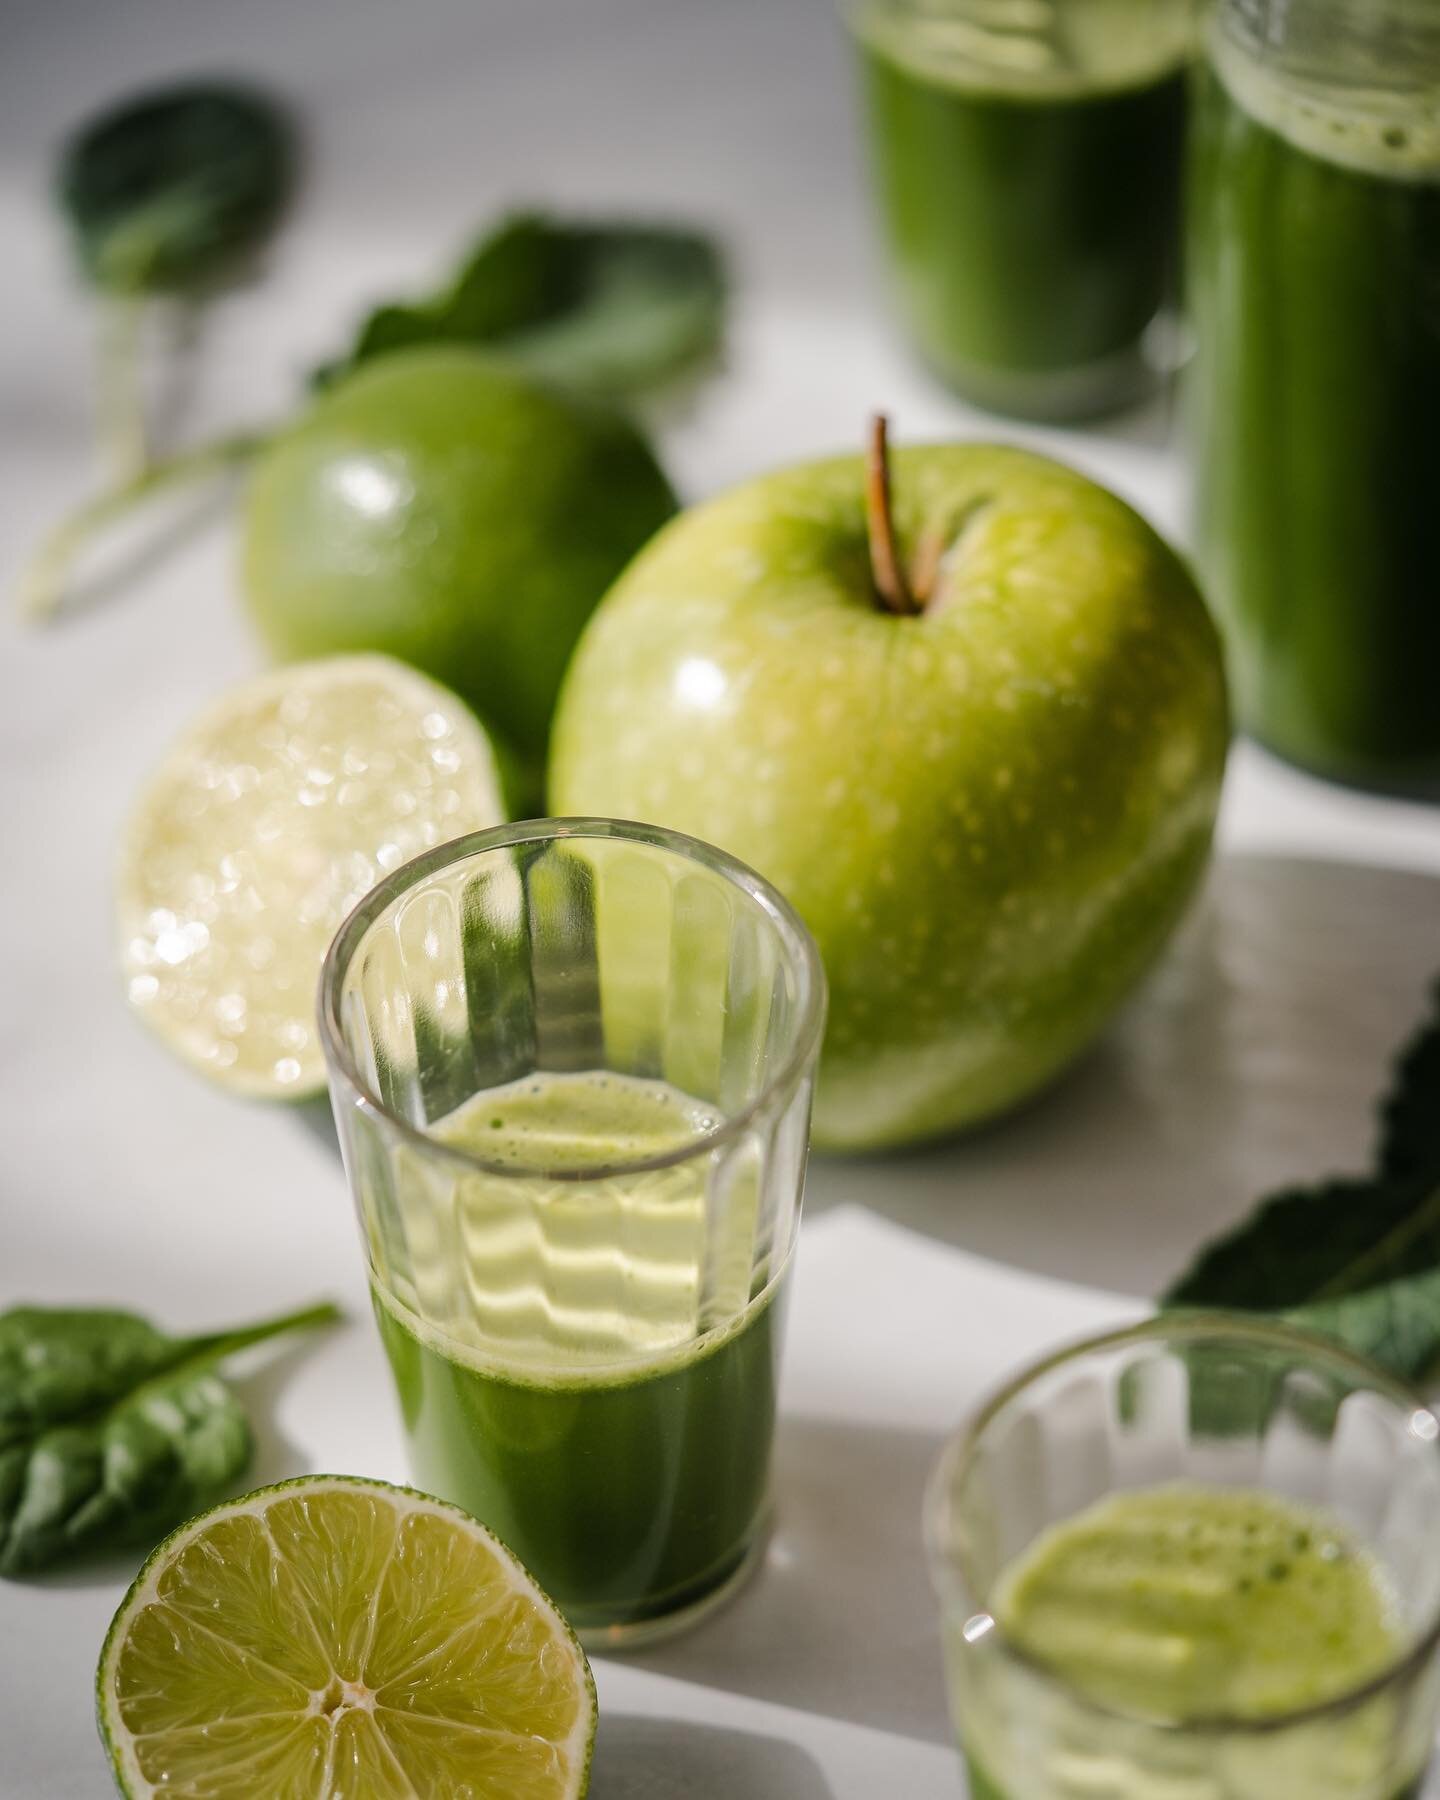 New recipe alert! 🚨

Kickstart your day with a refreshing and immune-boosting green juice 🌿 Packed with ginger, celery, and other nutrient-dense ingredients, this drink is the perfect way to fuel your body and support your immune system 💪😍

Click